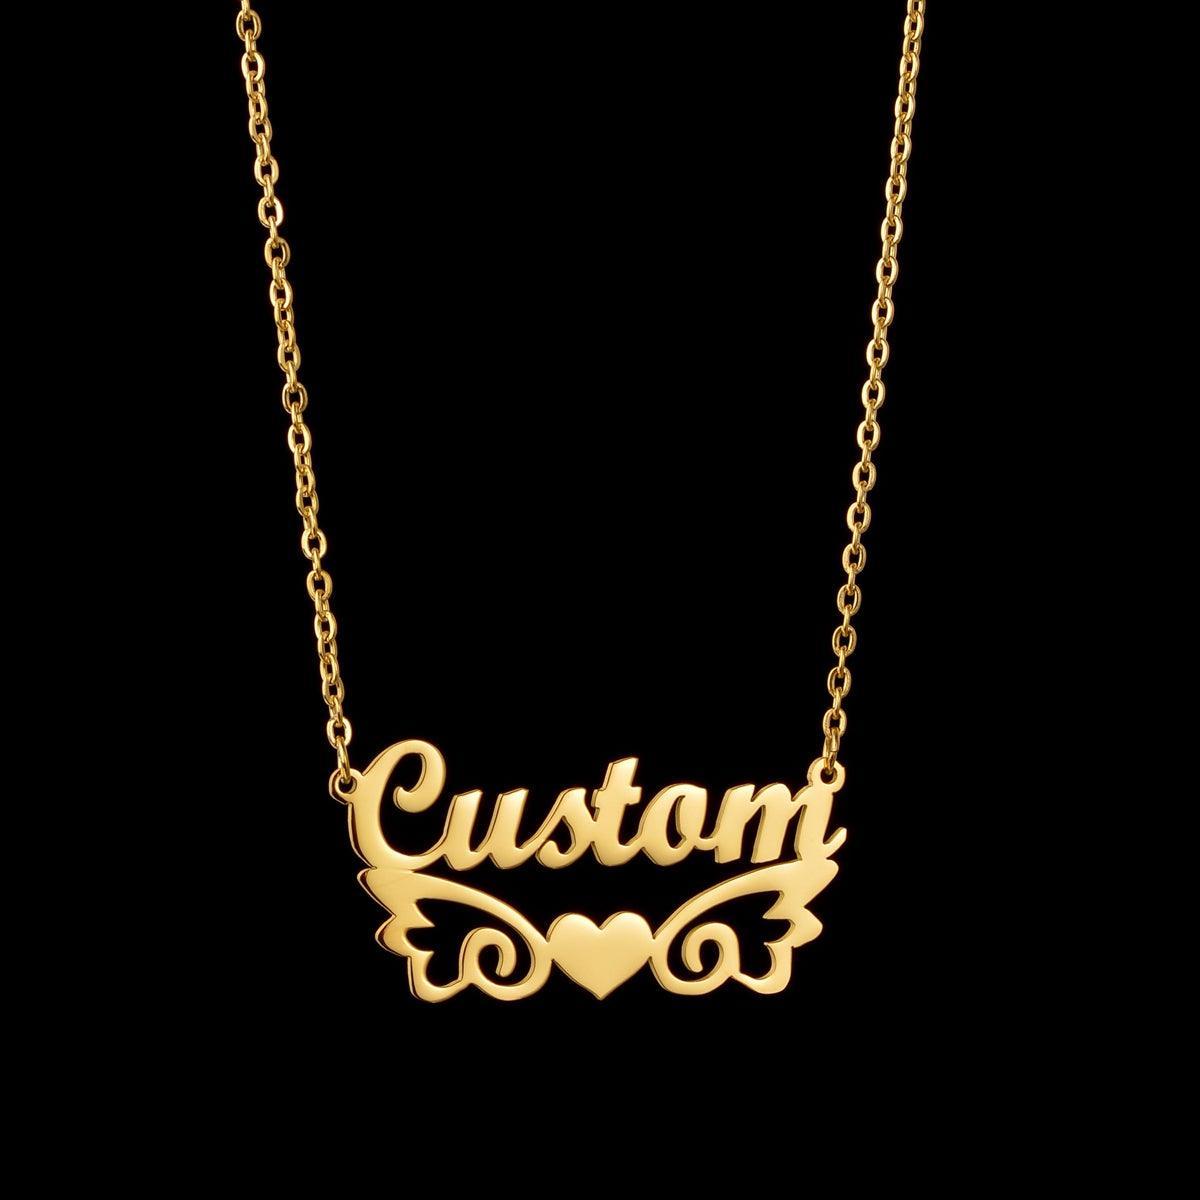 Personalized Custom Name Necklaces For Her for Christmas 2023 | Personalized Custom Name Necklaces For Her - undefined | Custom Name Necklace Personalized Necklace, Personalized Custom Diamond Necklaces, Personalized Custom Heart-shaped Letter Necklace, Personalized Frosted Custom Necklace | From Hunny Life | hunnylife.com